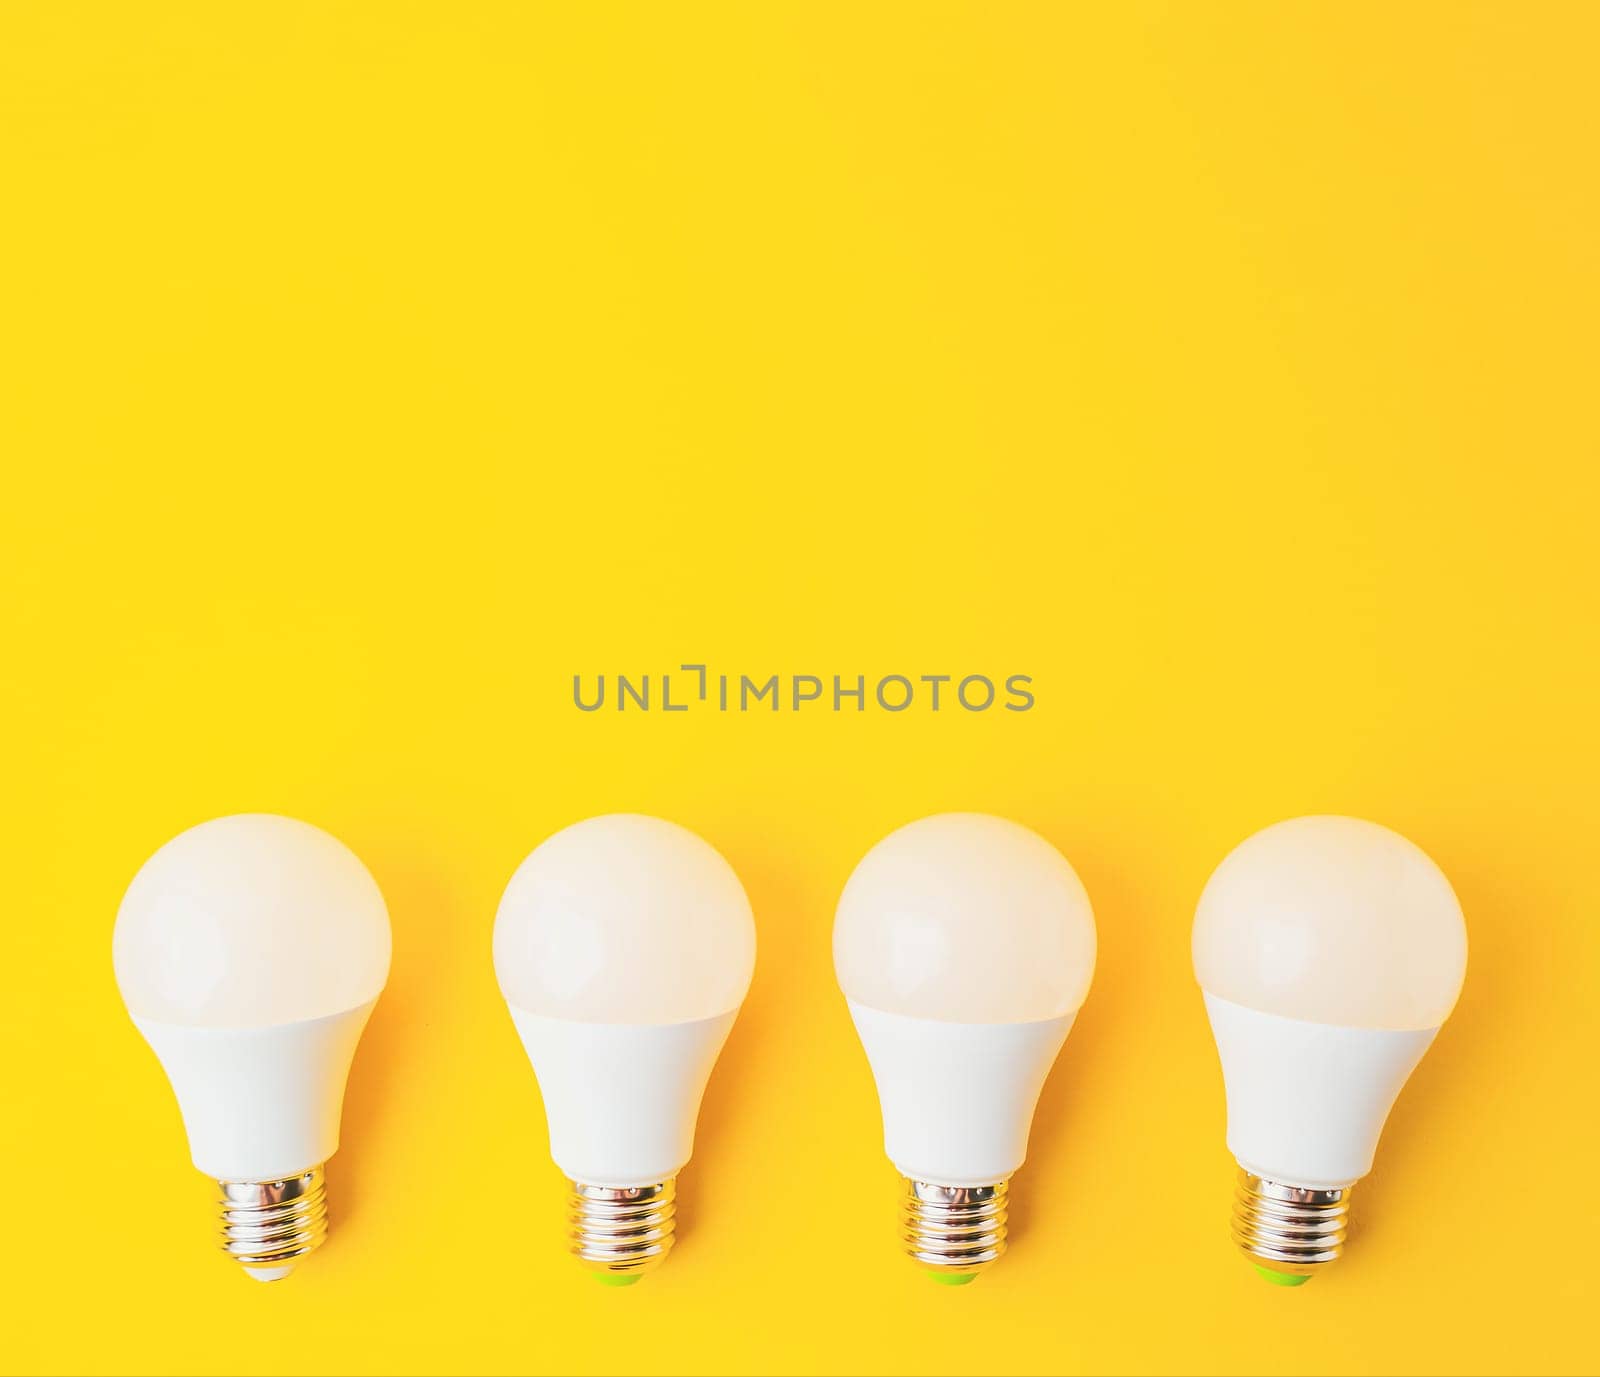 Four white light bulbs are arranged on a yellow background by Alla_Morozova93